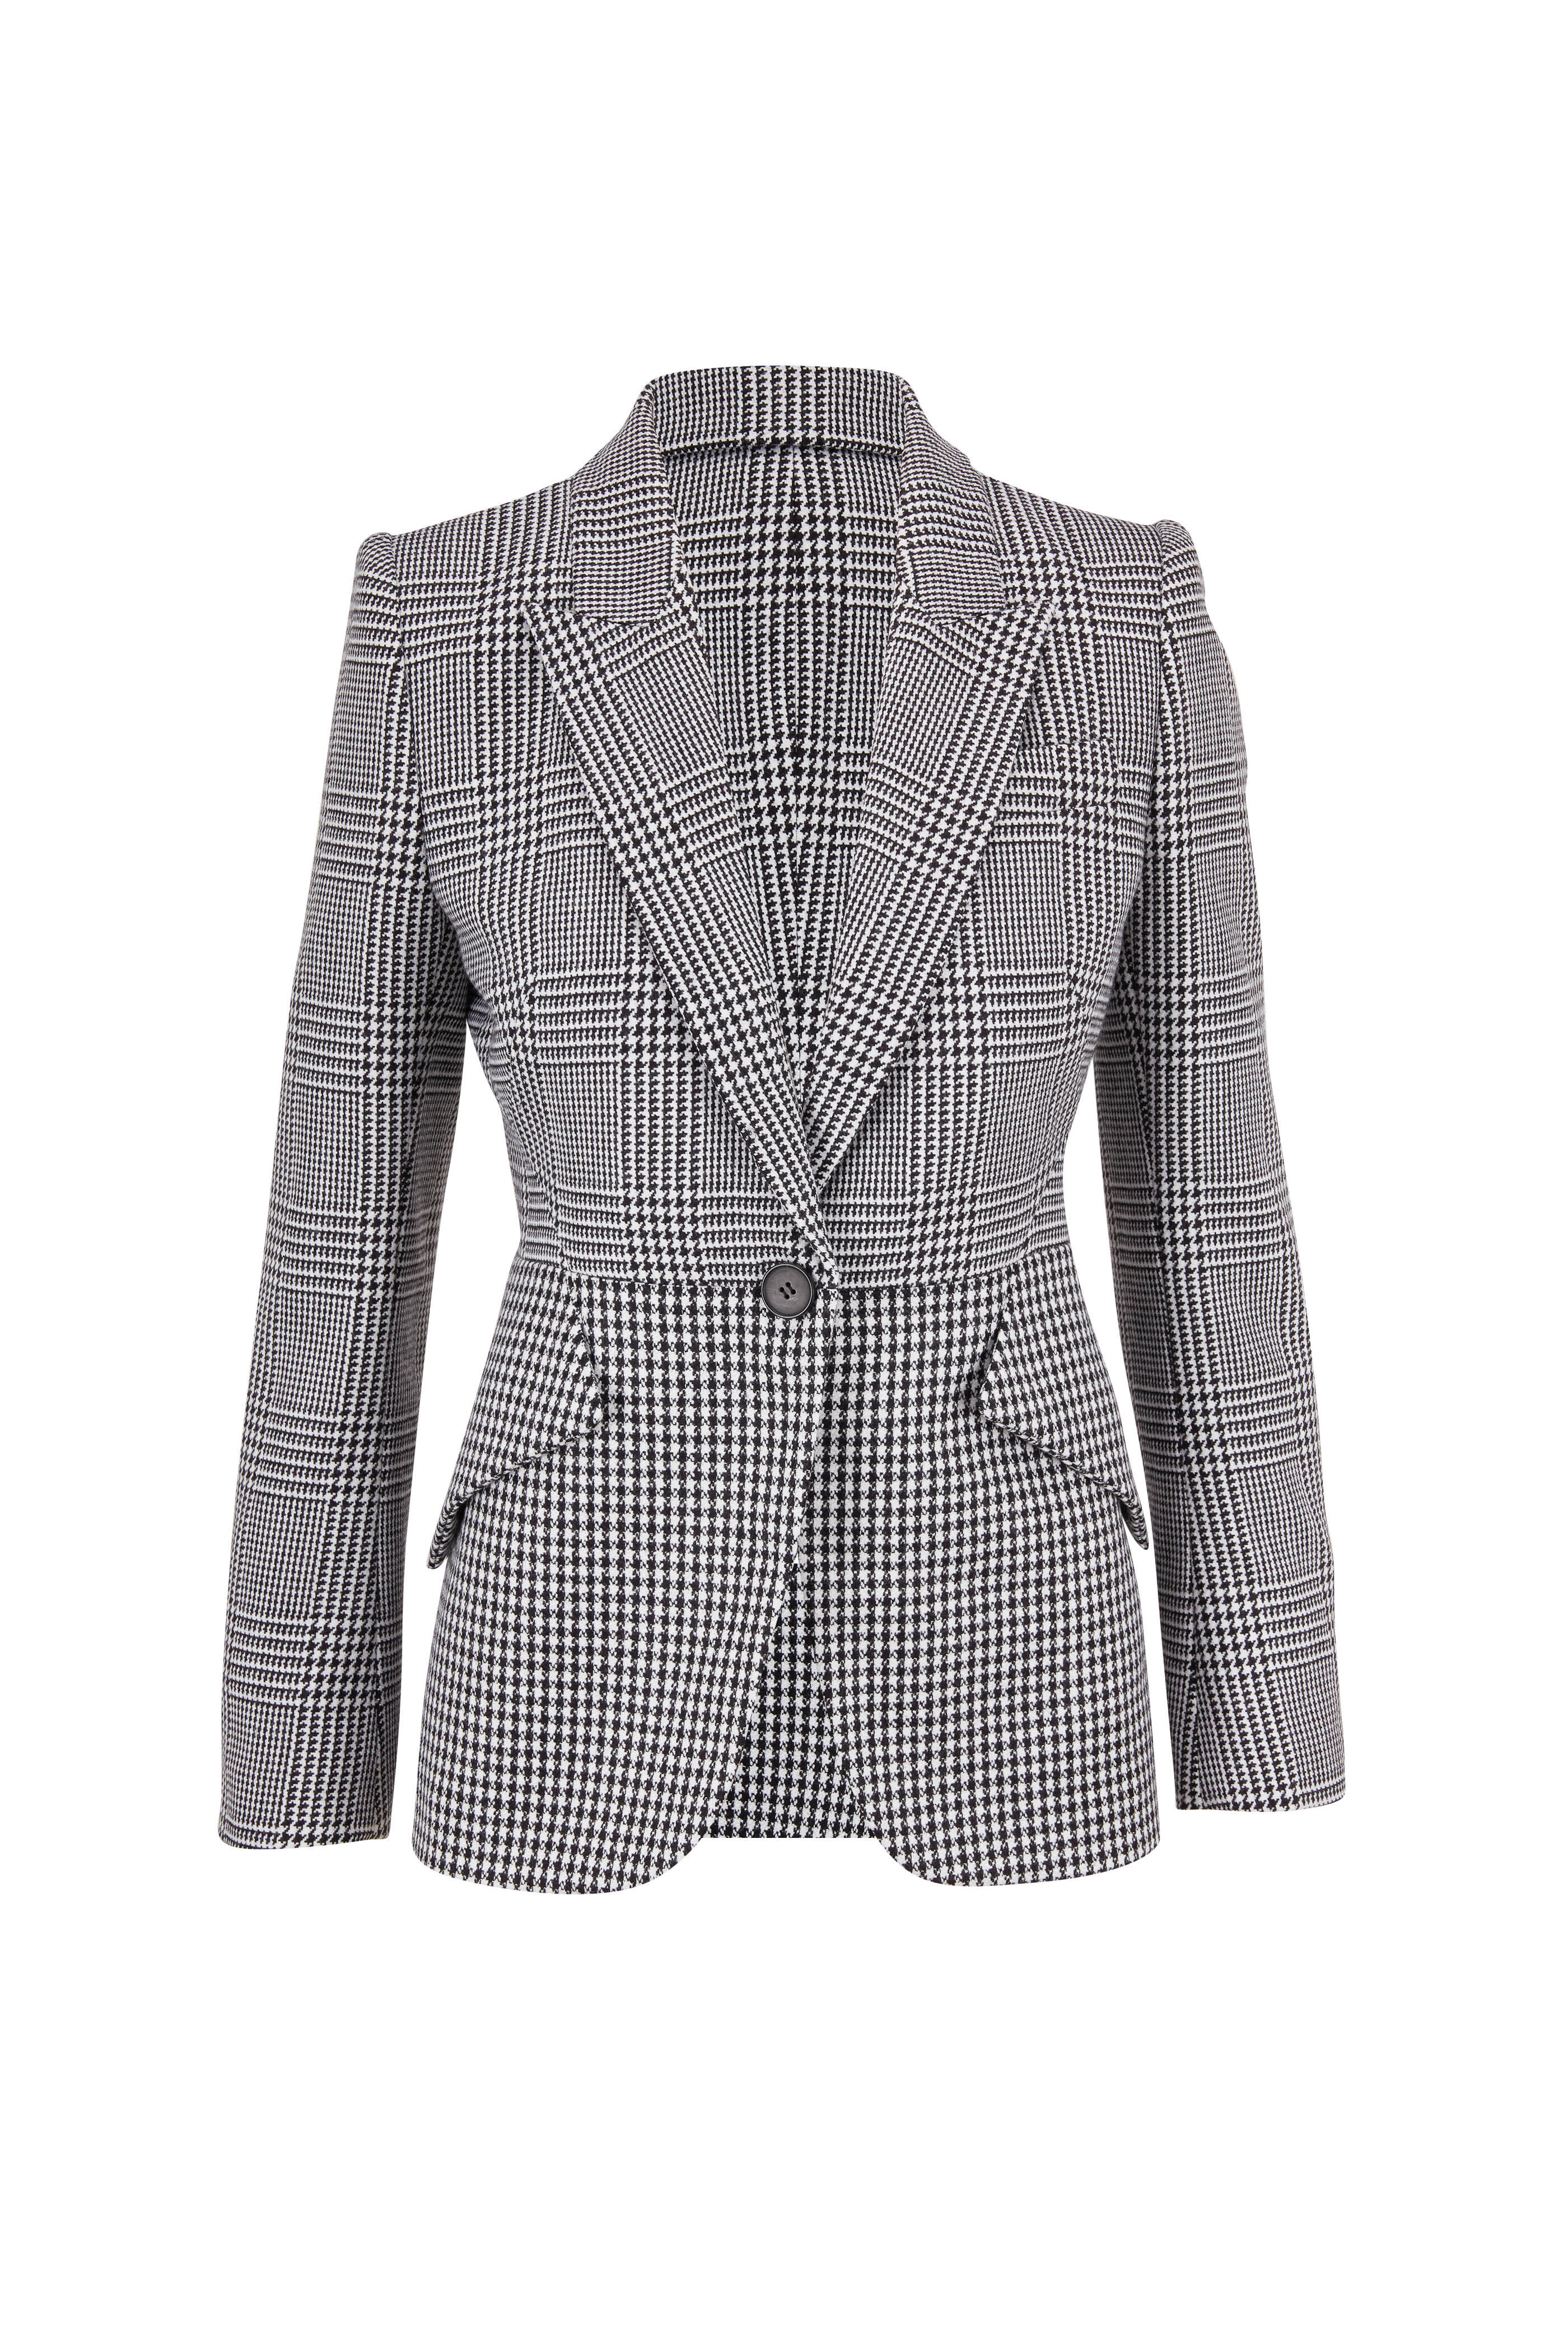 Alexander McQueen - Black & White Prince Of Wales & Houndstooth Jacket